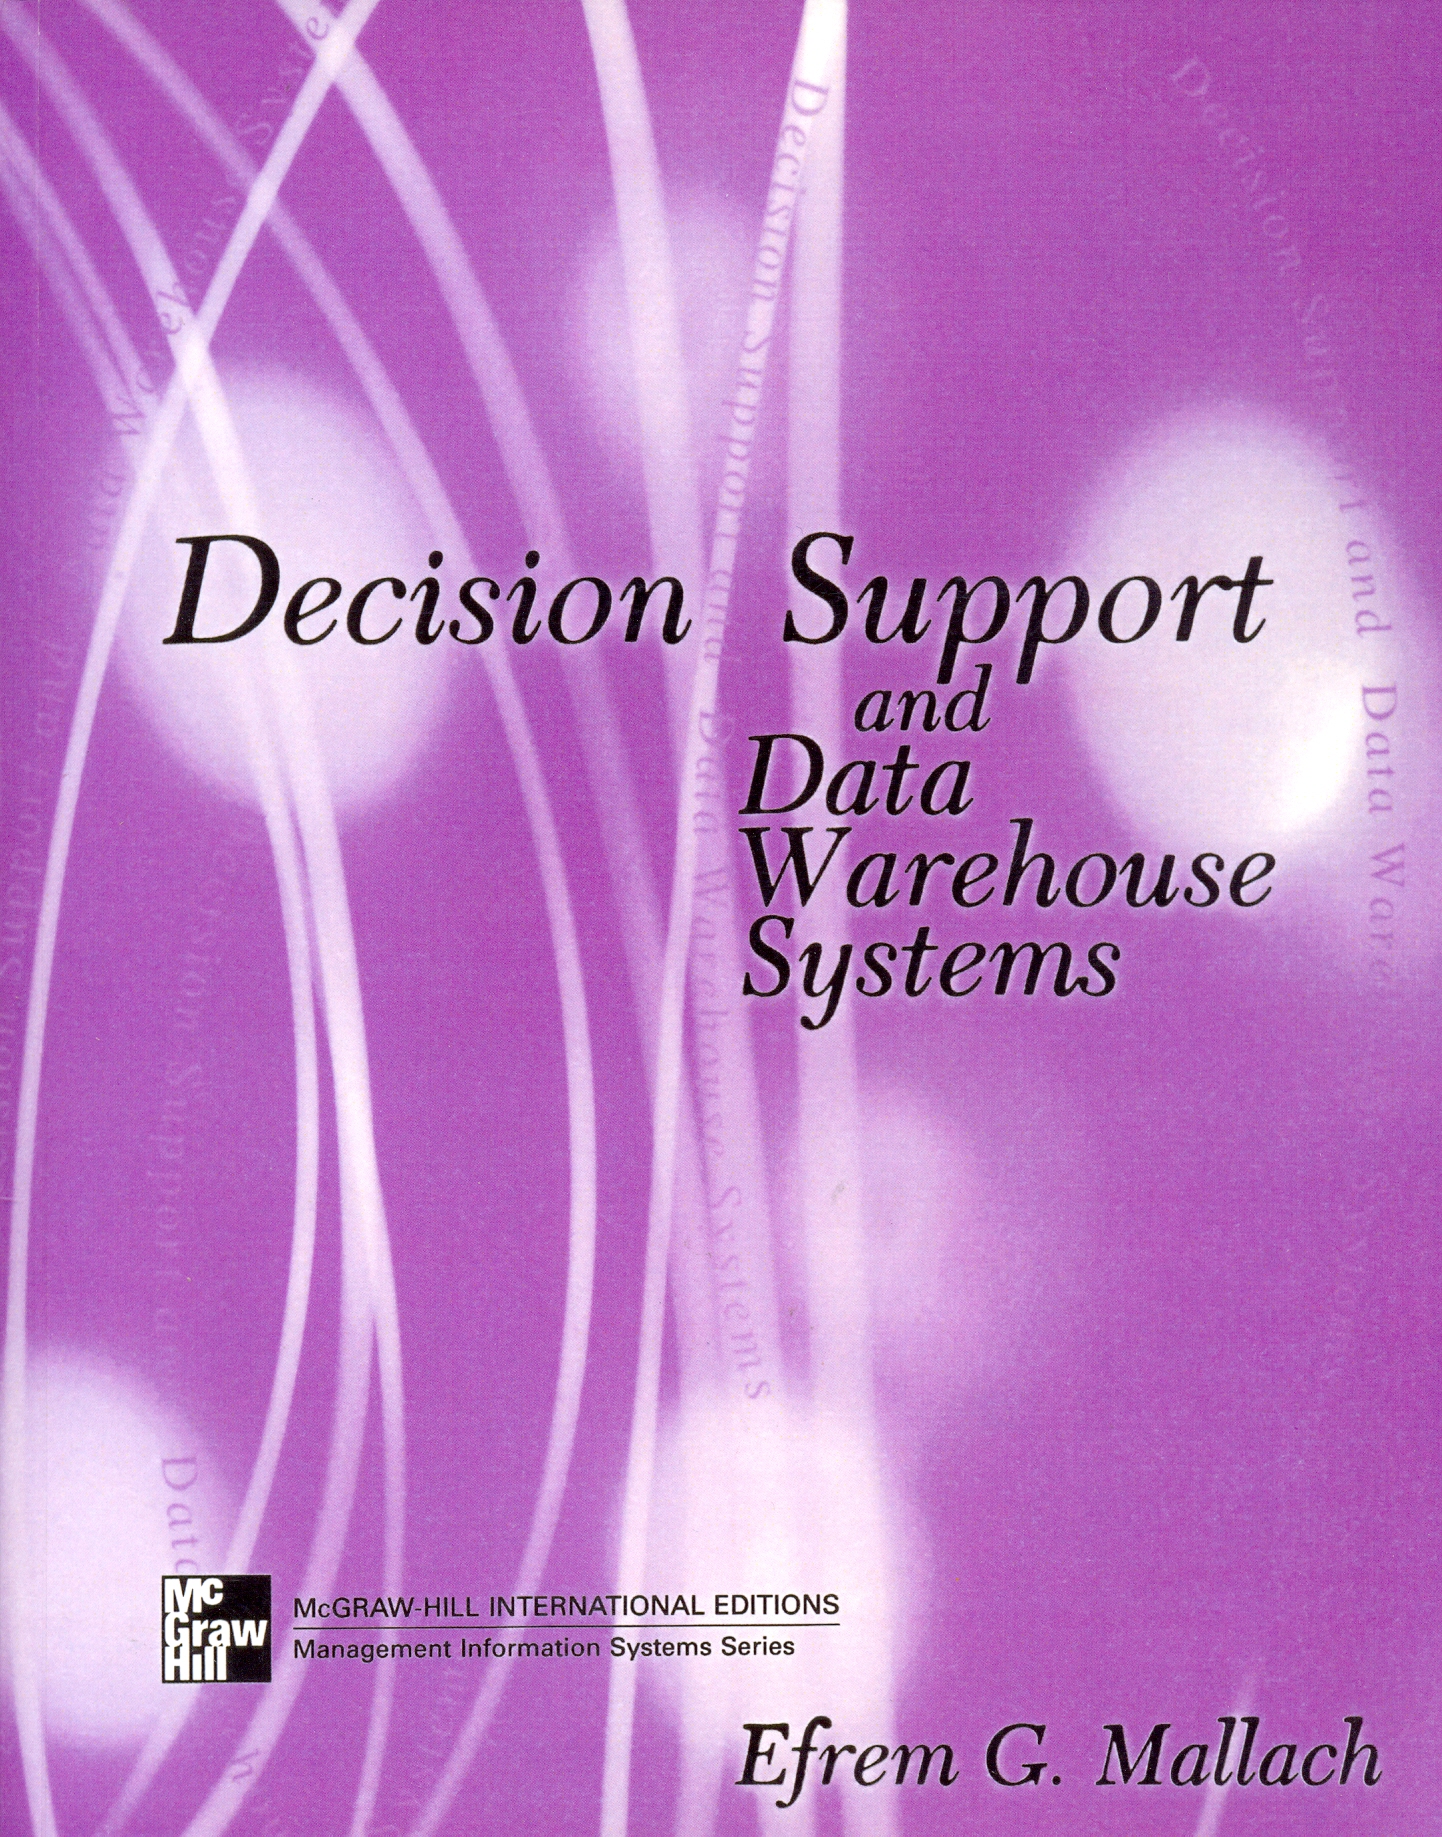 Decision Support and Data Warehouse systems